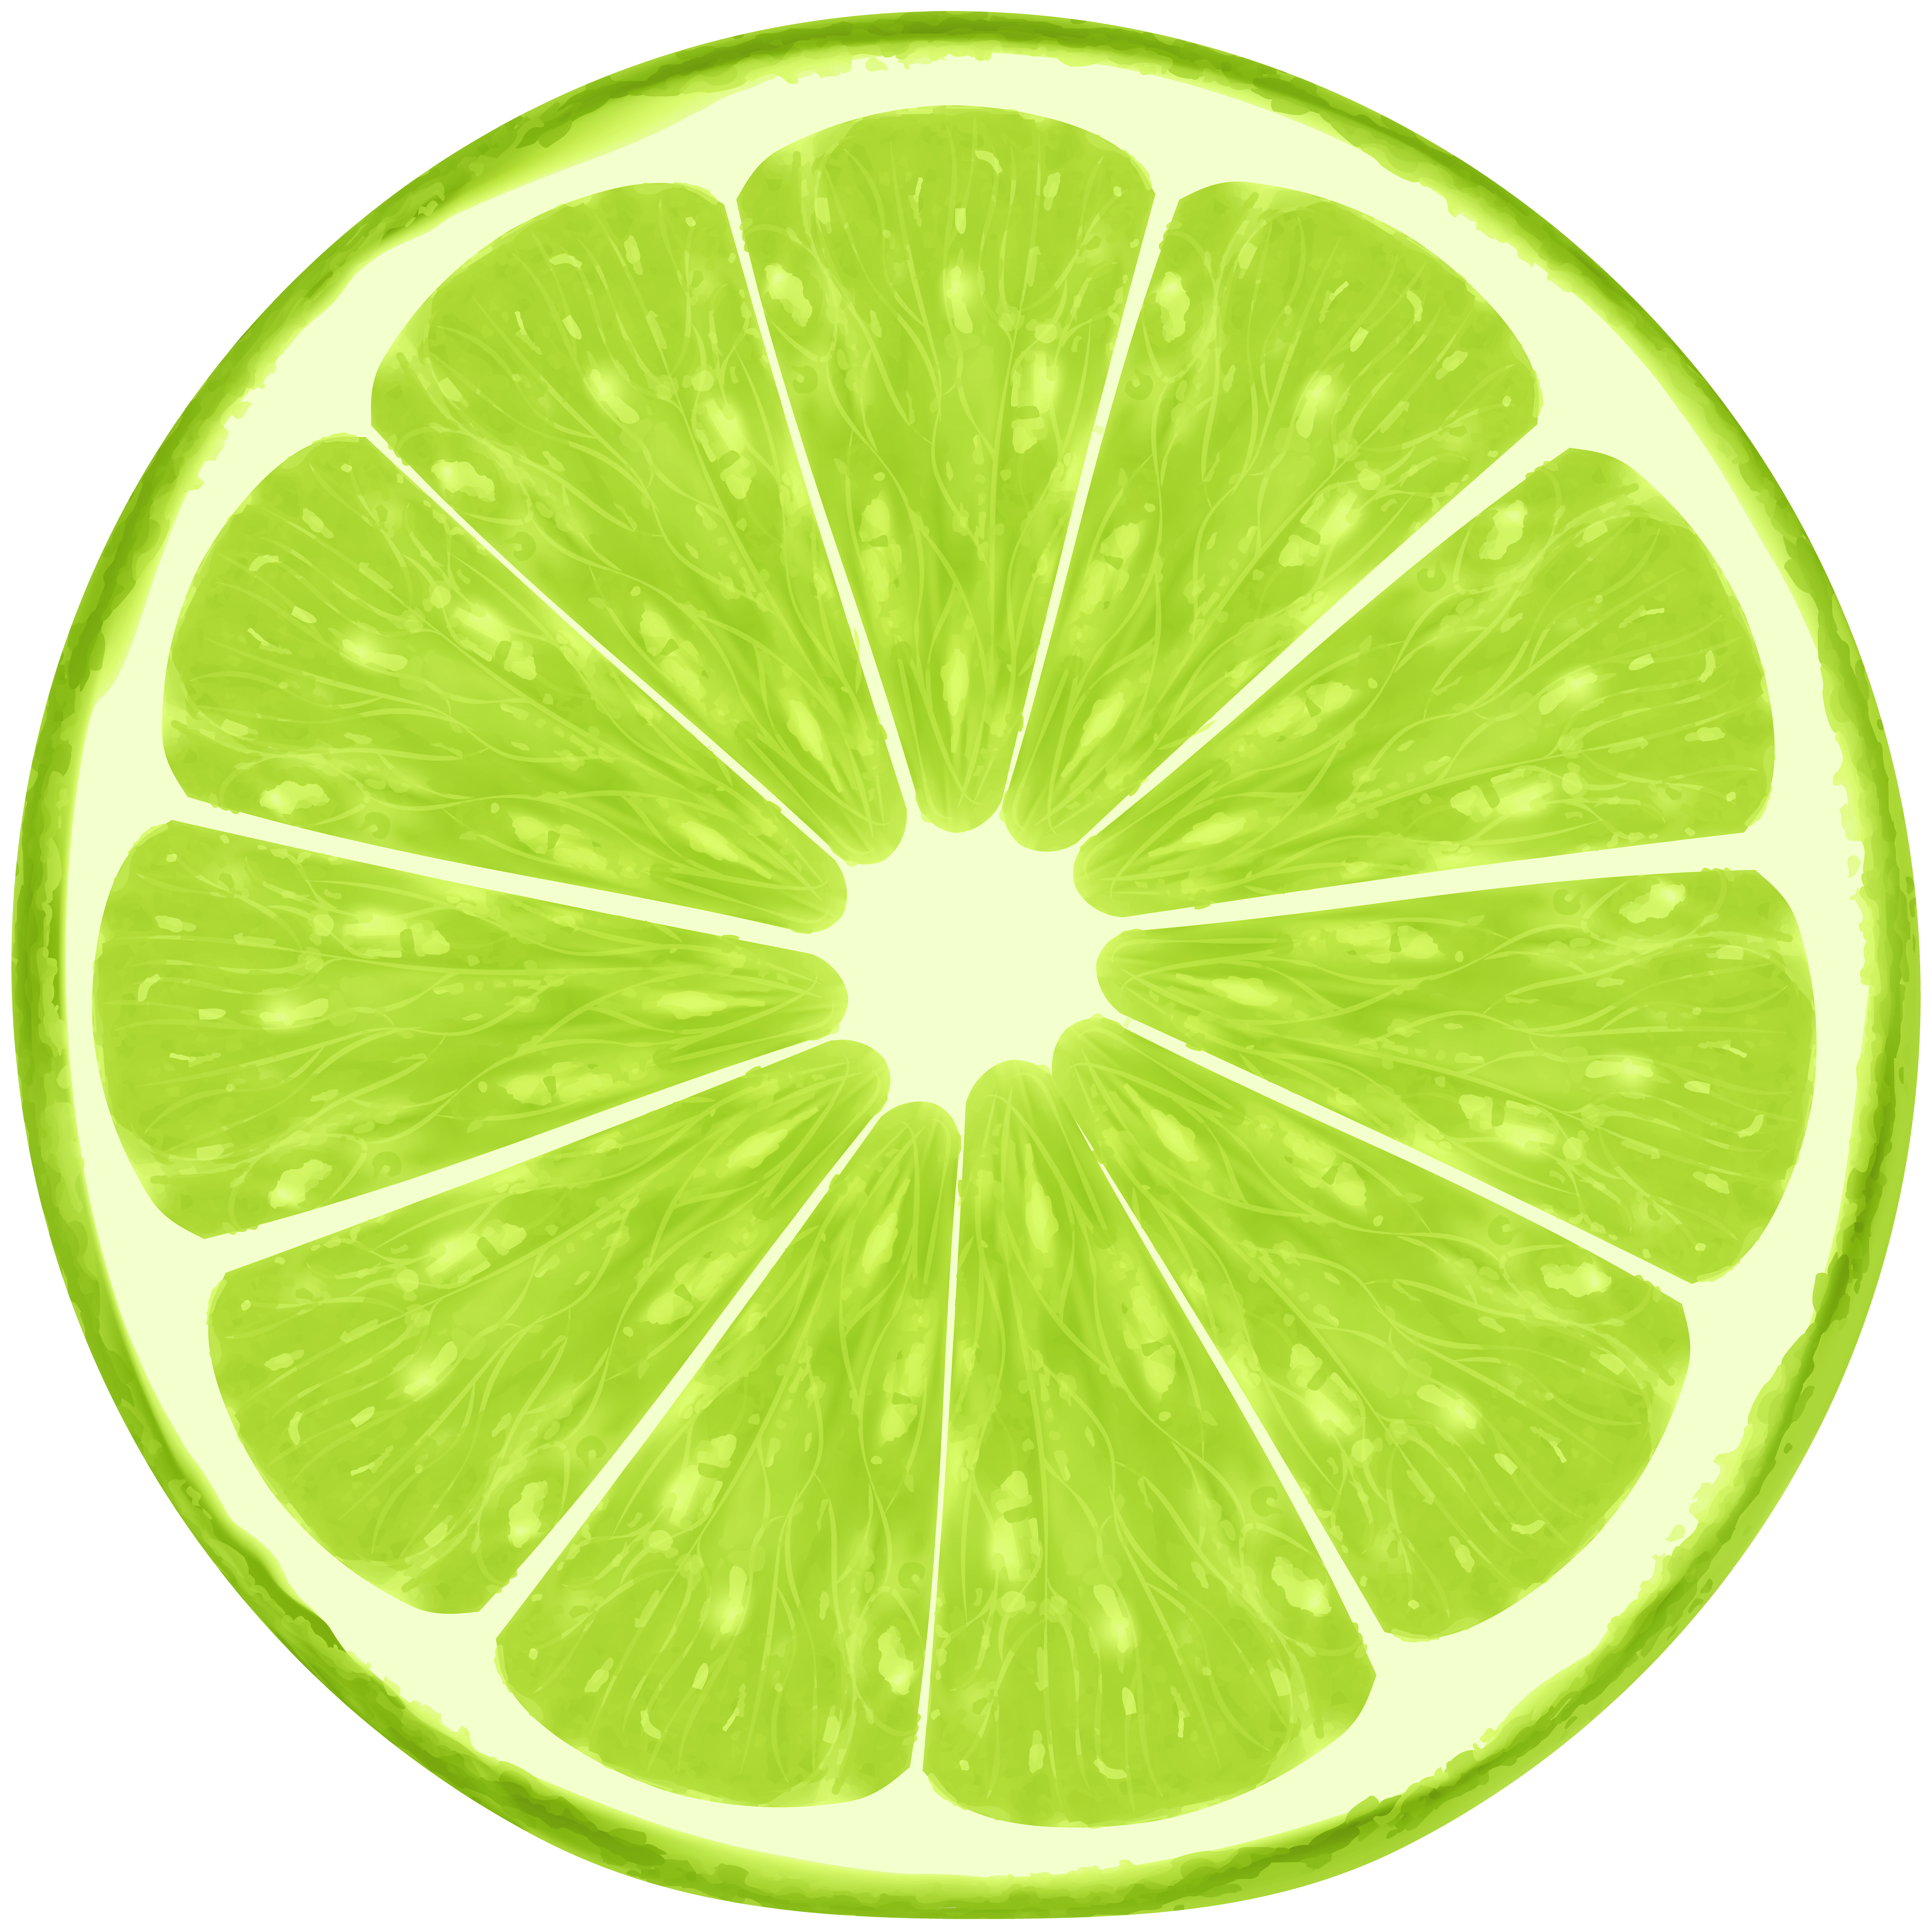 Green Lemon Slices PNG Clipart​-Quality Free Image and Transparent PNG Clipart